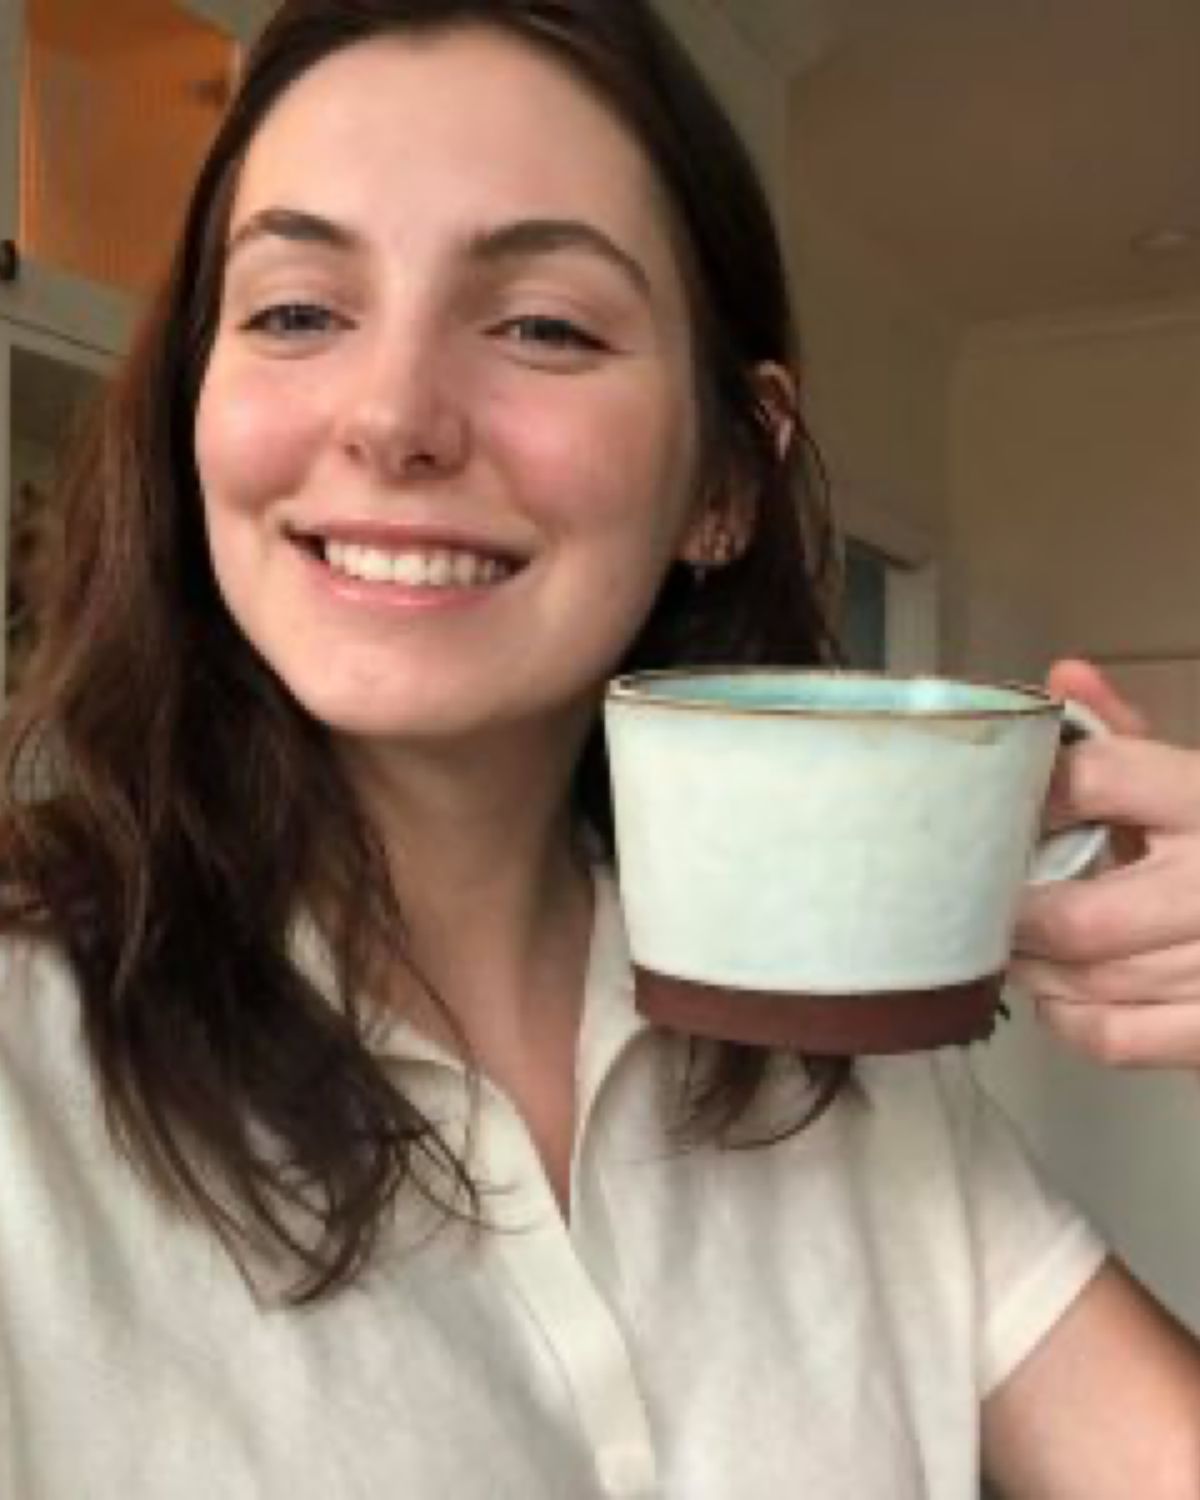 A smiling girl holding a mug of coffee.